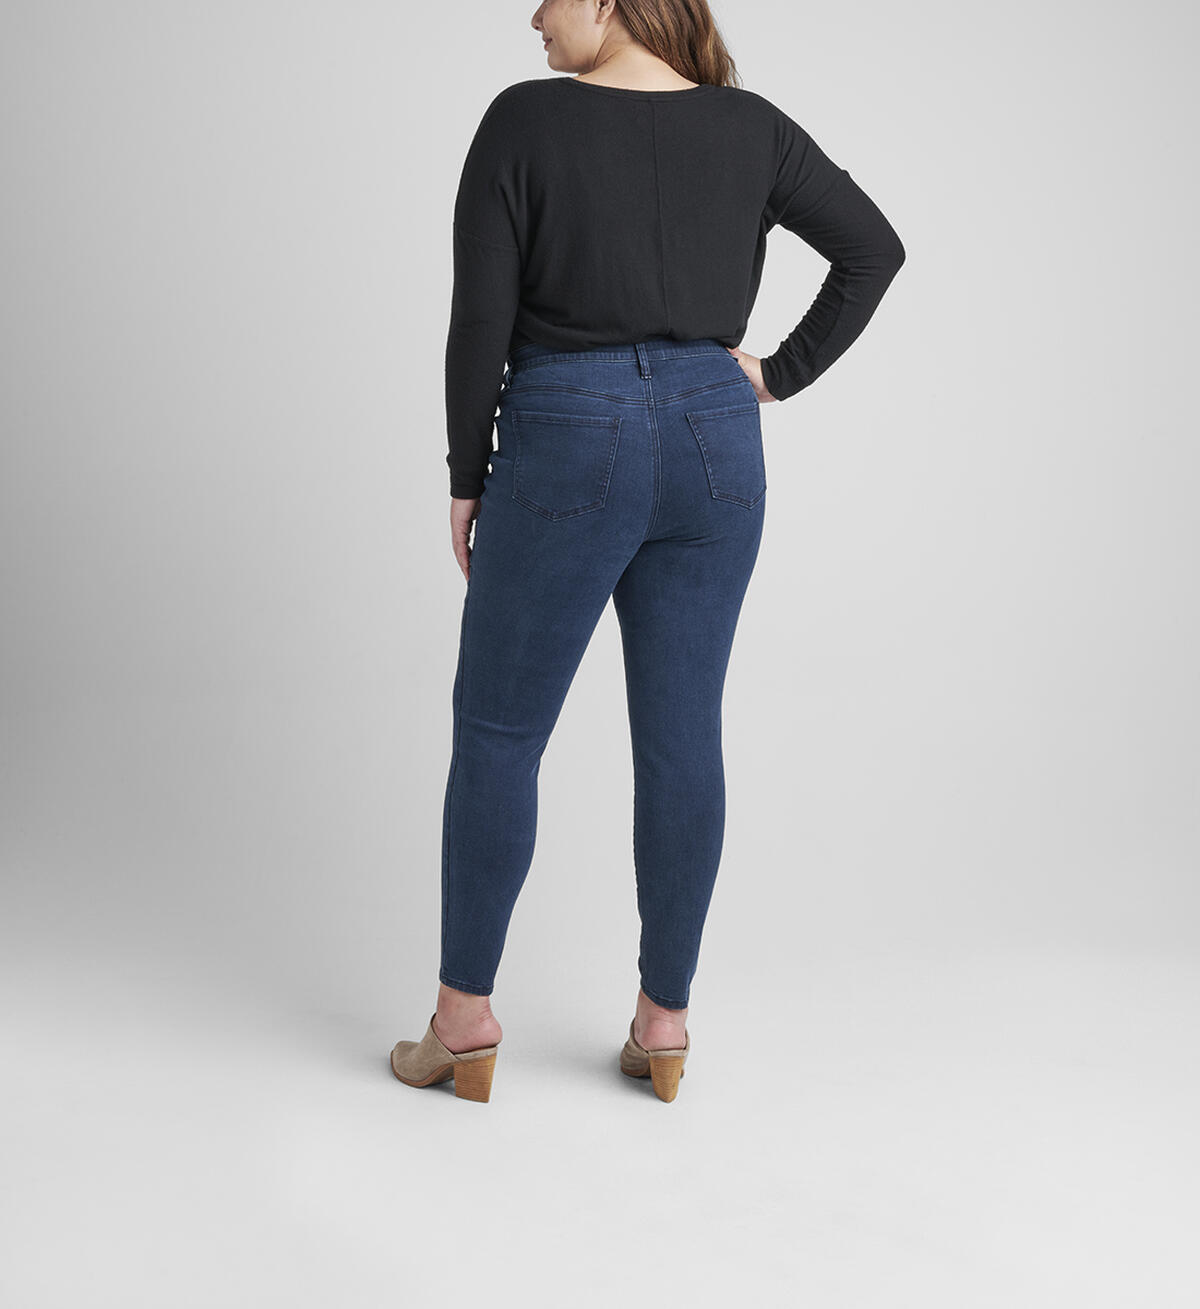 Cecilia High Rise Skinny Jeans Plus Size, , hi-res image number 1